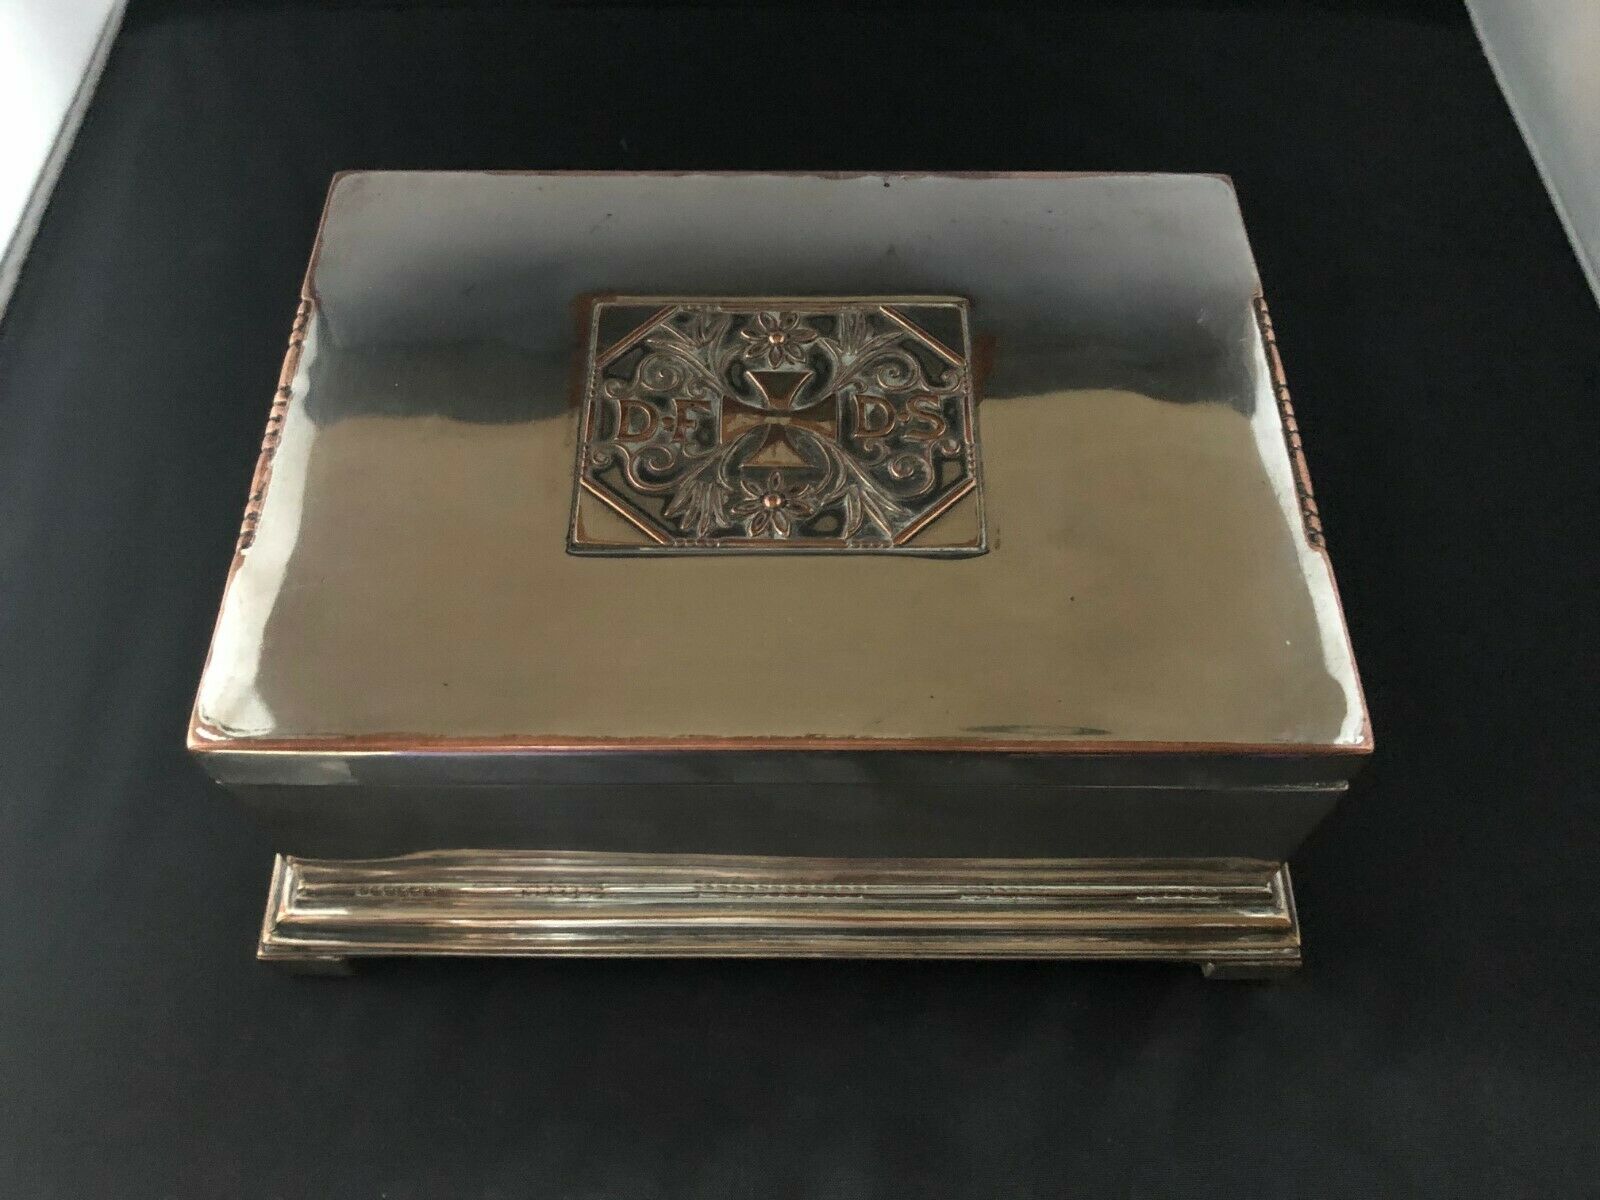 Antique Valuations: Very Rare Vintage Antique Georg Jensen DFDS Silver Plate box from 1916